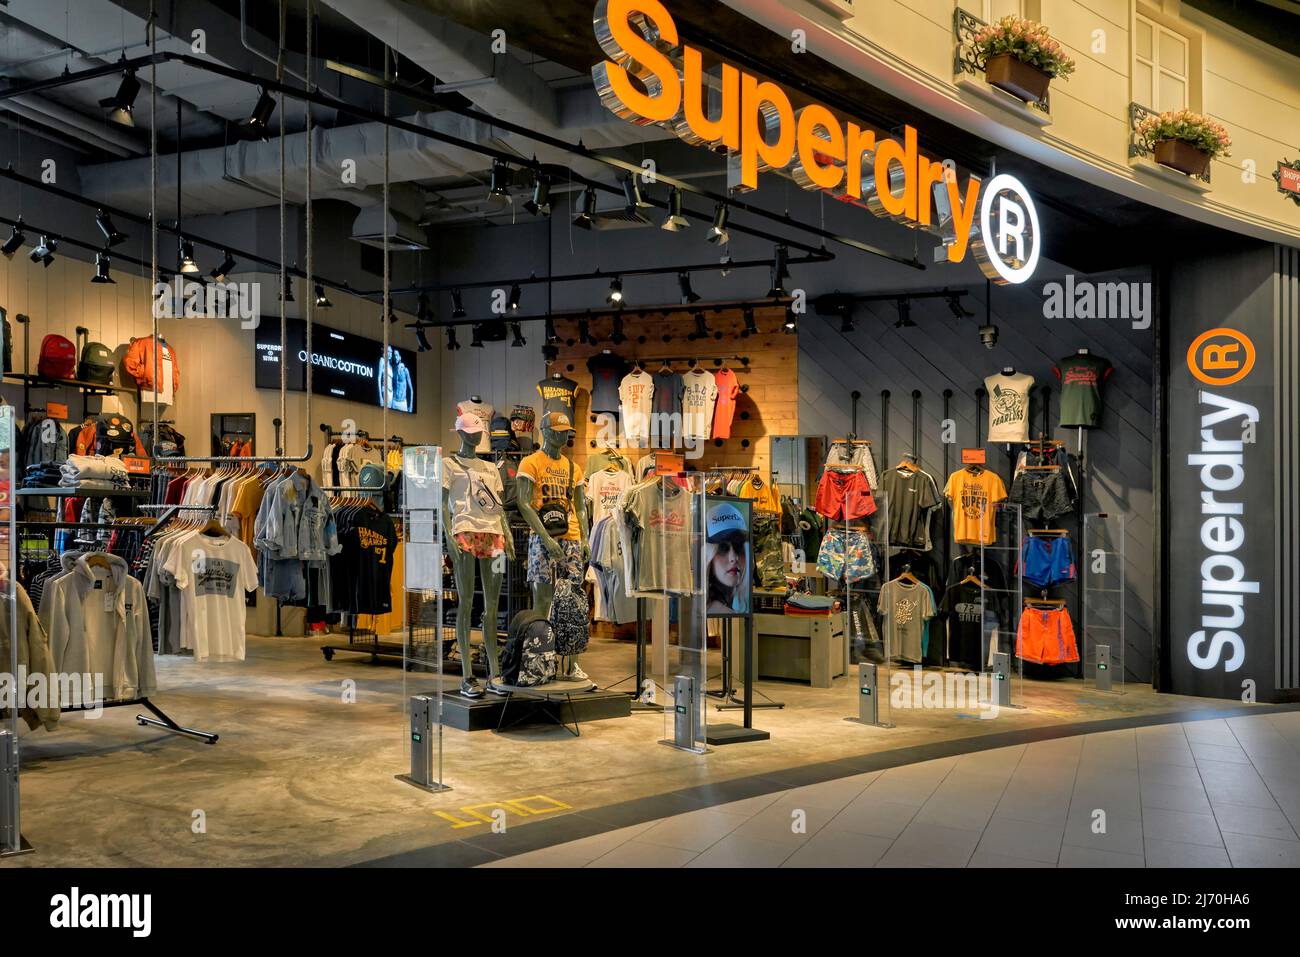 Superdry store Thailand Stock Photo